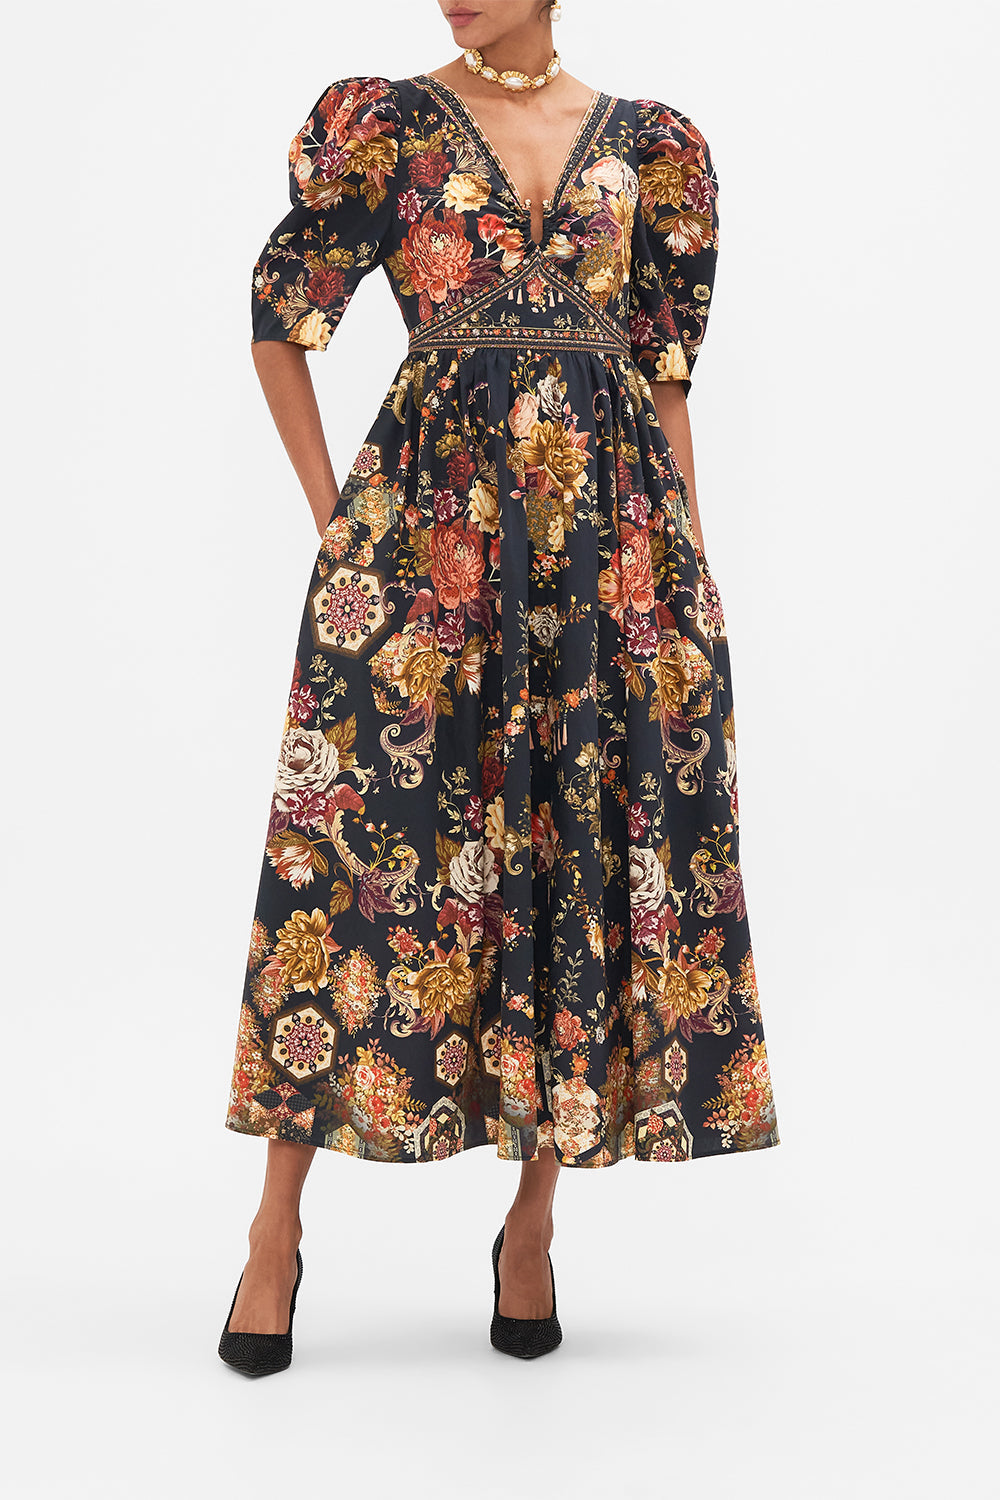 CAMILLA Floral Puff Sleeve Long Dress with Hardware in Stitched in Time